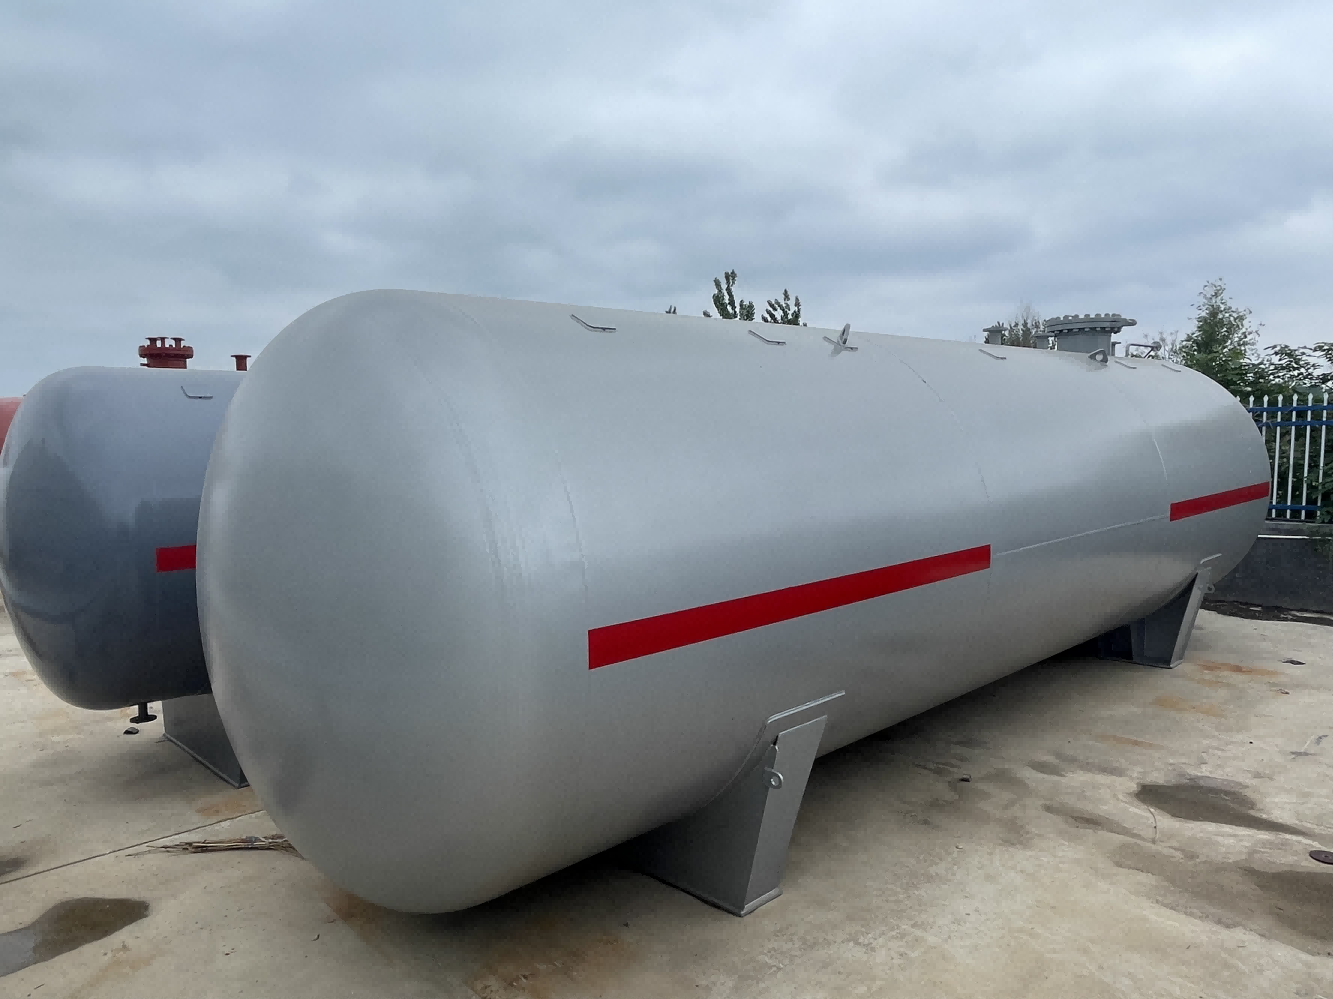 The application principle of the emergency water injection port of the LPG storage tank